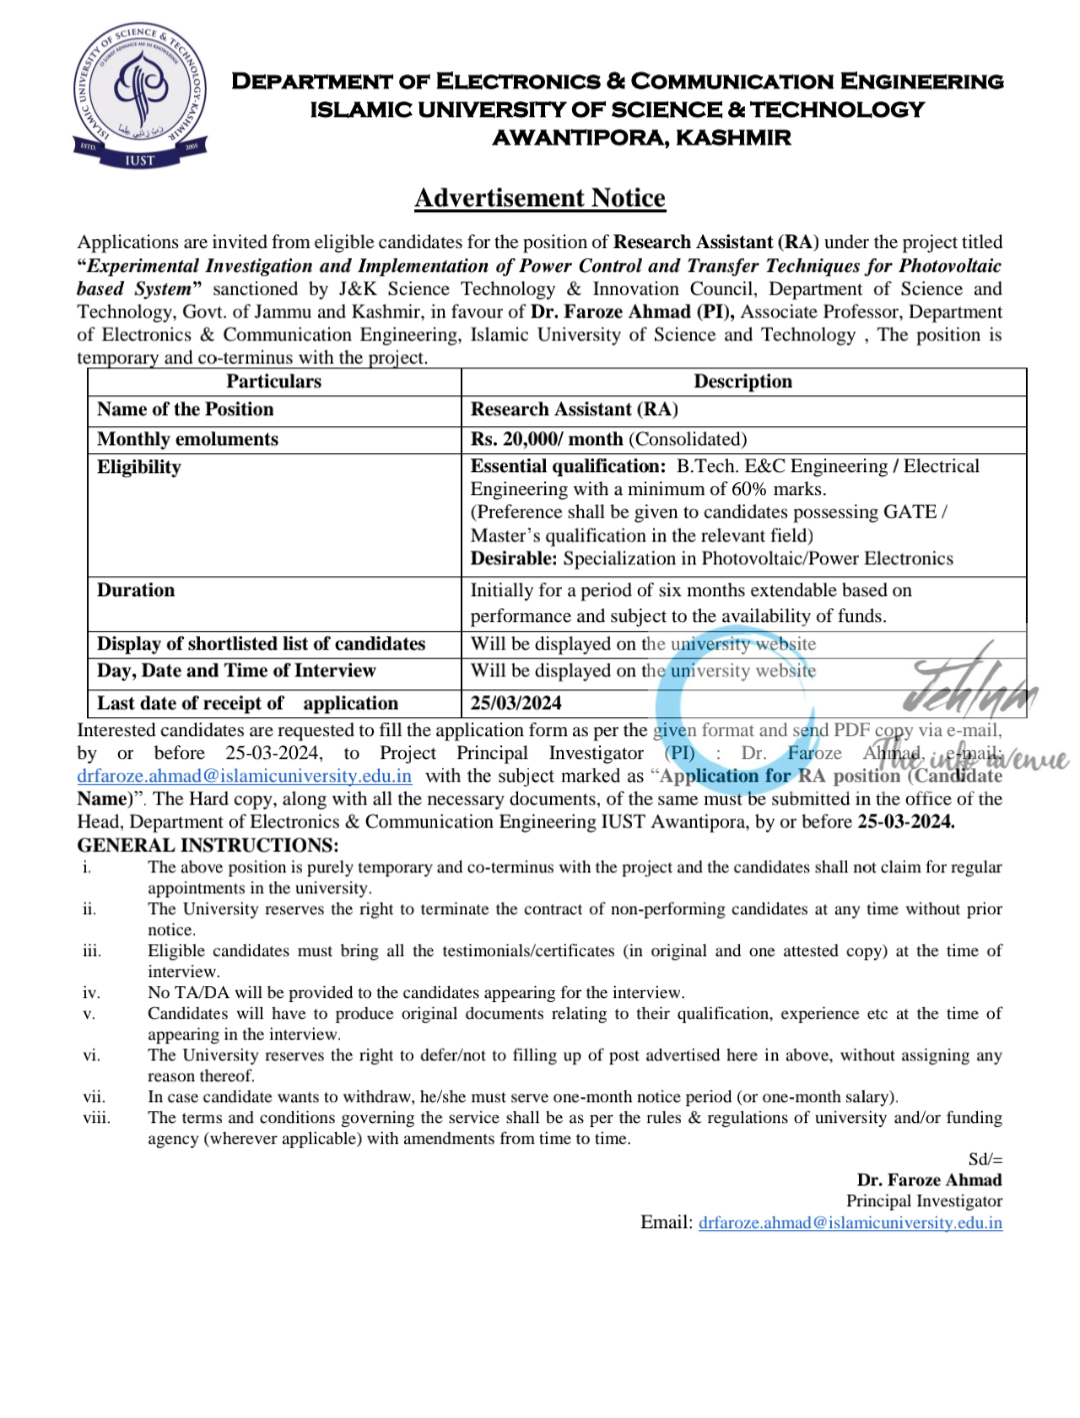 IUST KASHMIR DEPTT OF ELECTRONICS AND COMMUNICATION ENGINEERING RESEARCH ASSISTANT ADVERTISEMENT NOTICE 2024